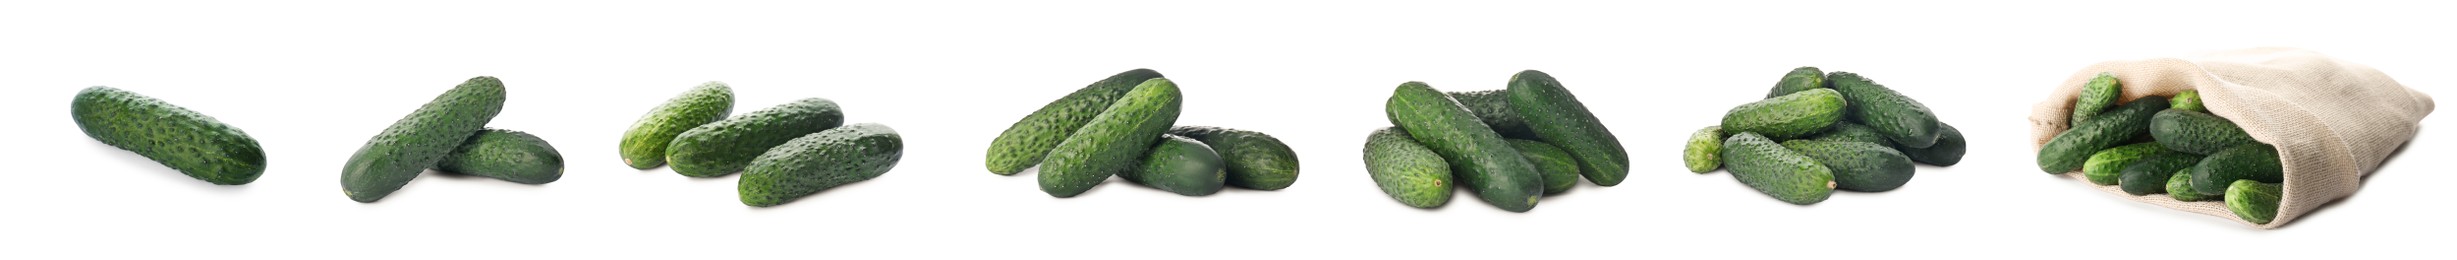 Set with whole ripe cucumbers on white background. Banner design